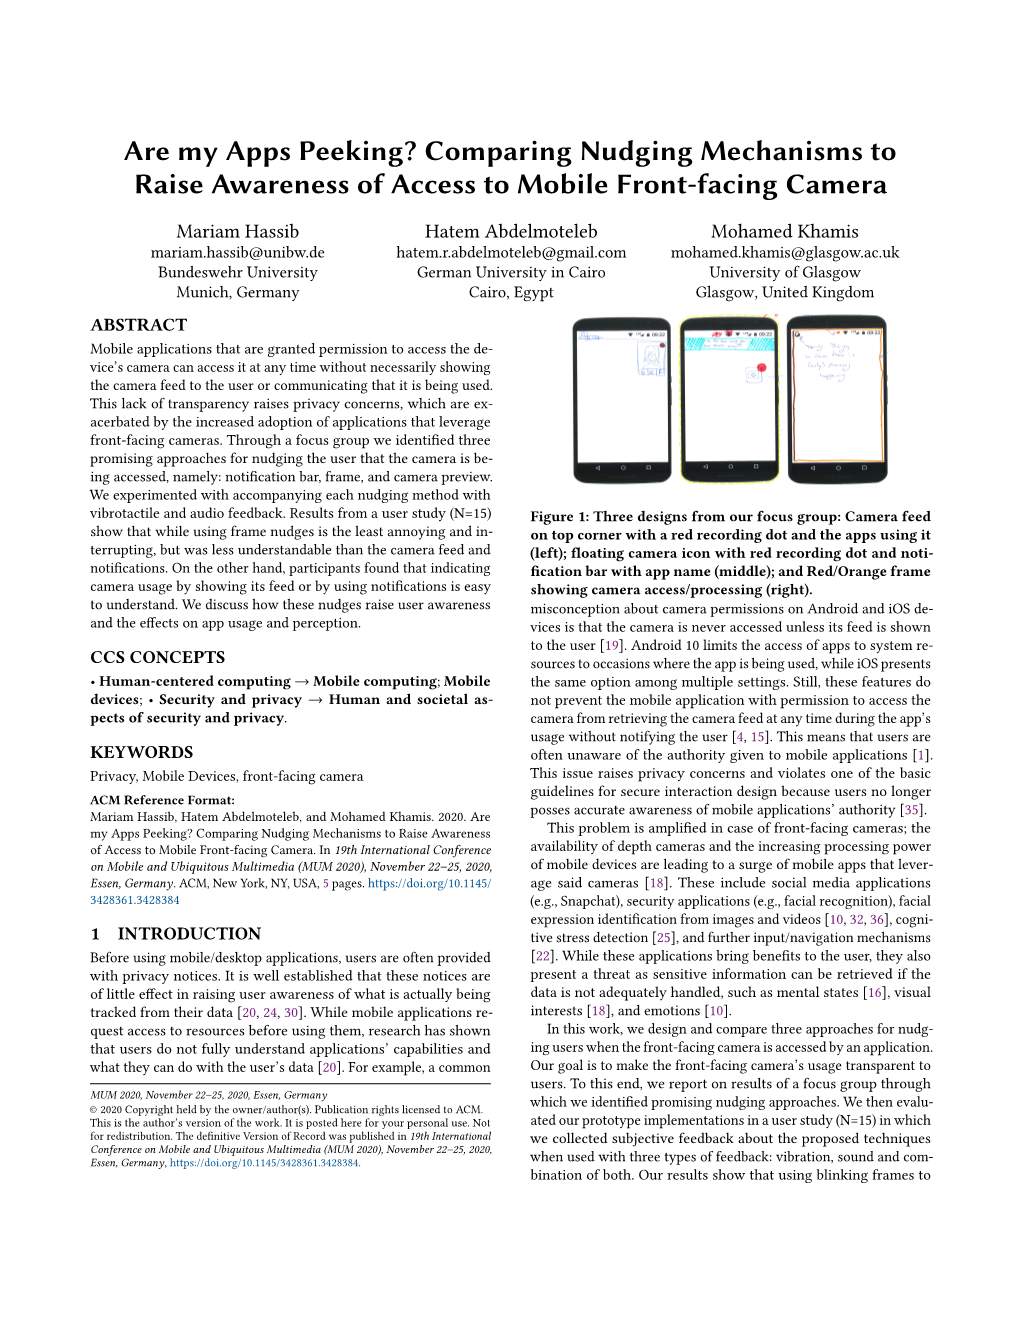 Are My Apps Peeking? Comparing Nudging Mechanisms to Raise Awareness of Access to Mobile Front-Facing Camera